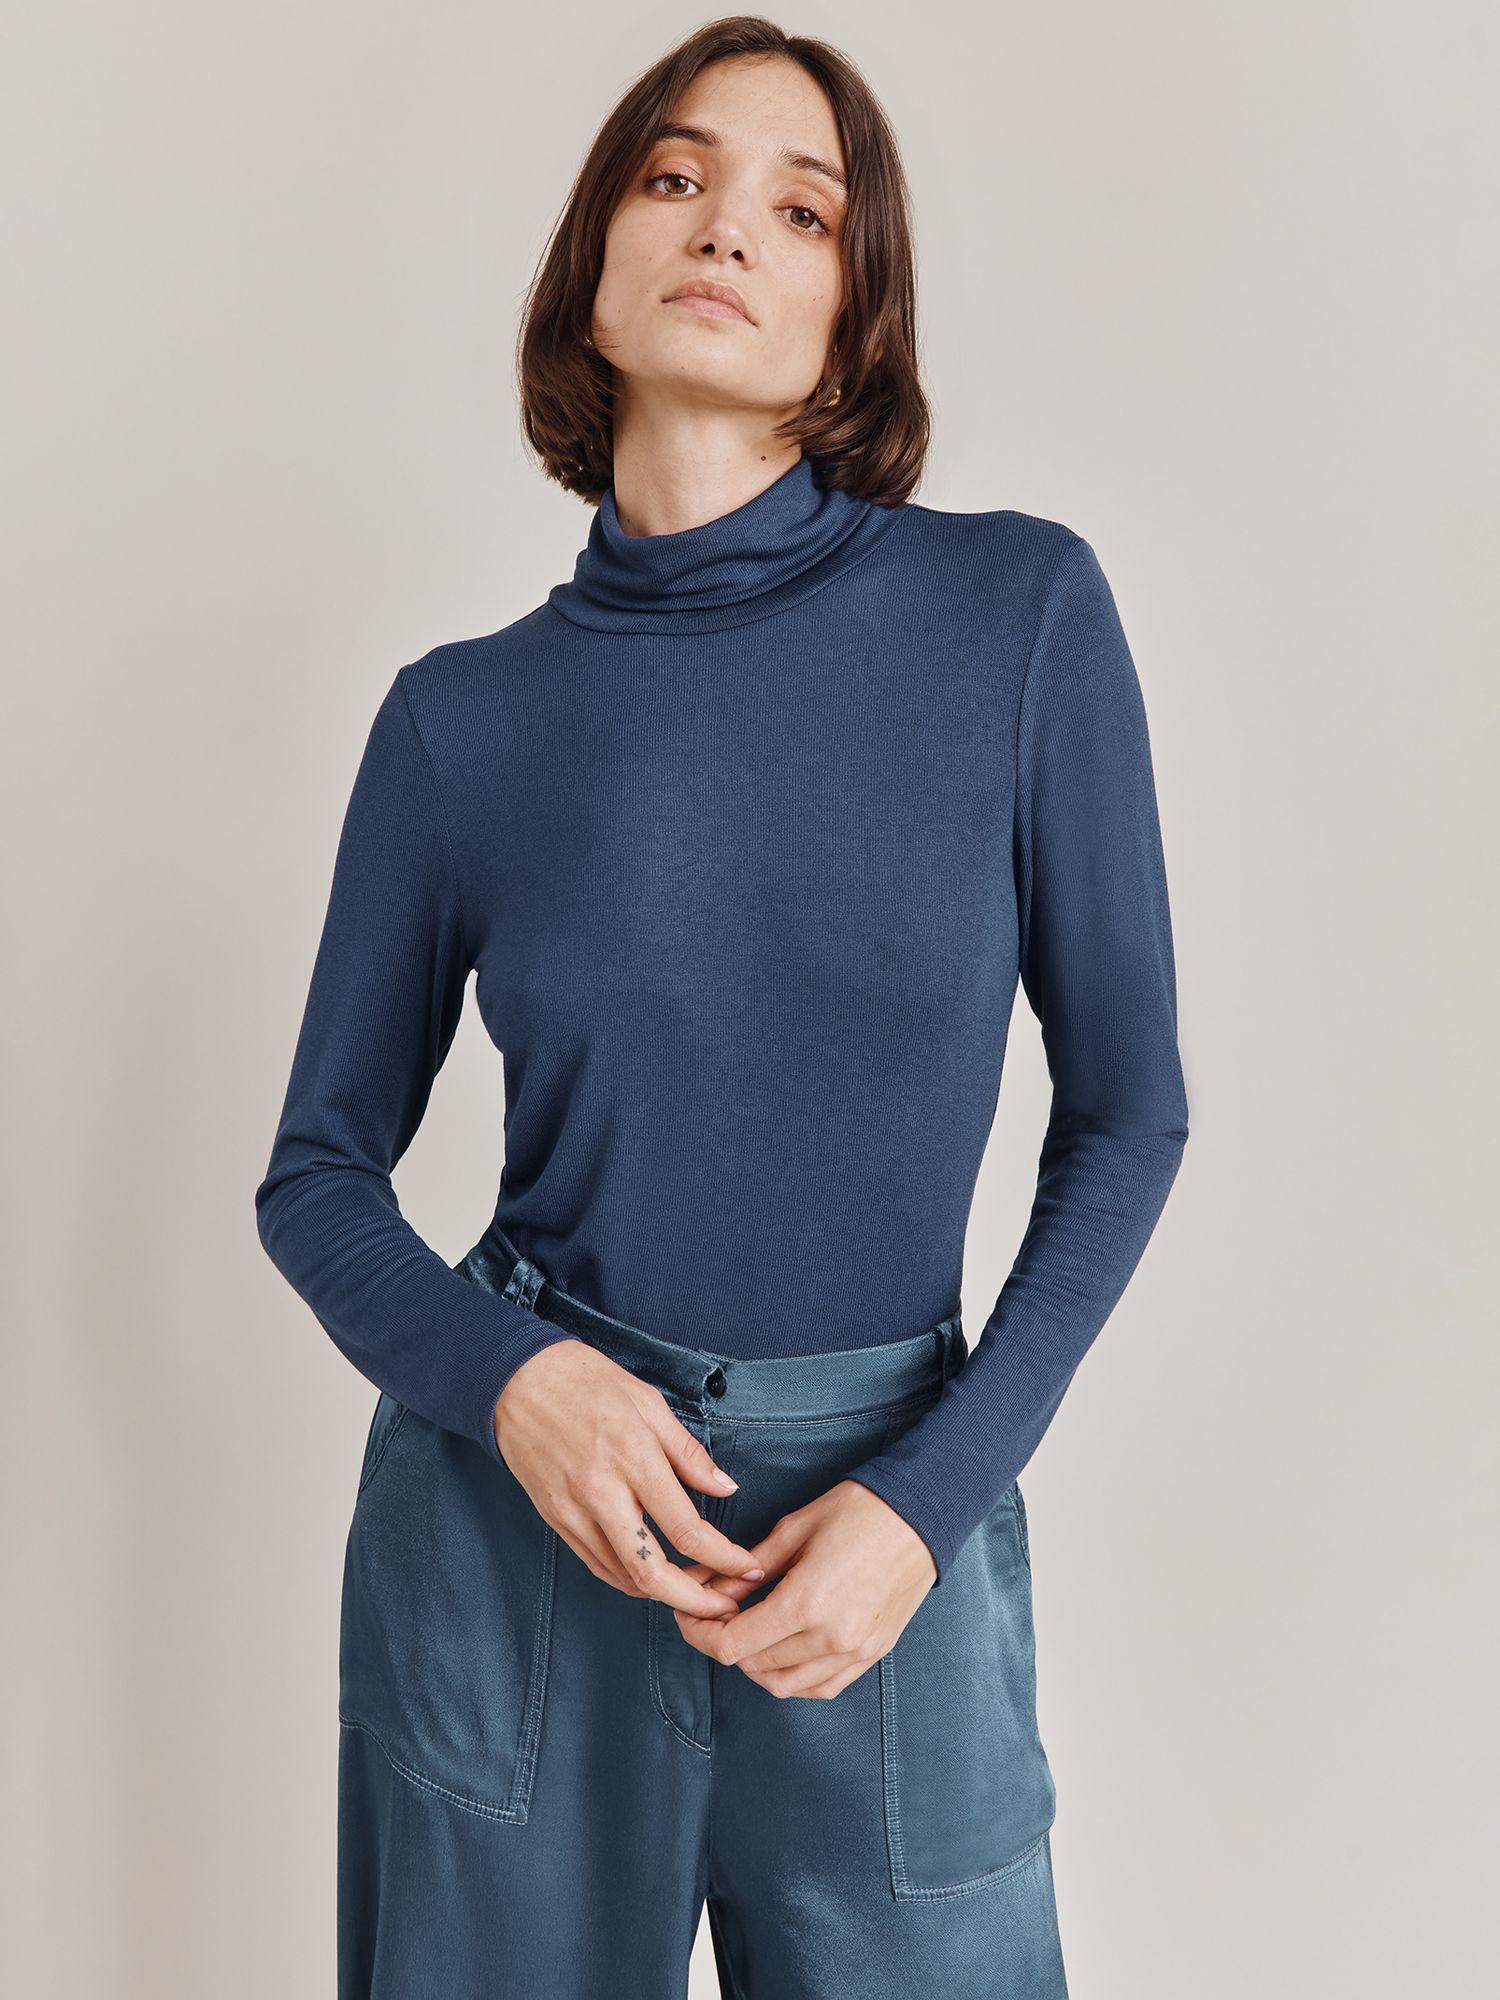 Ghost Fern Roll Neck Top, Navy at John Lewis & Partners